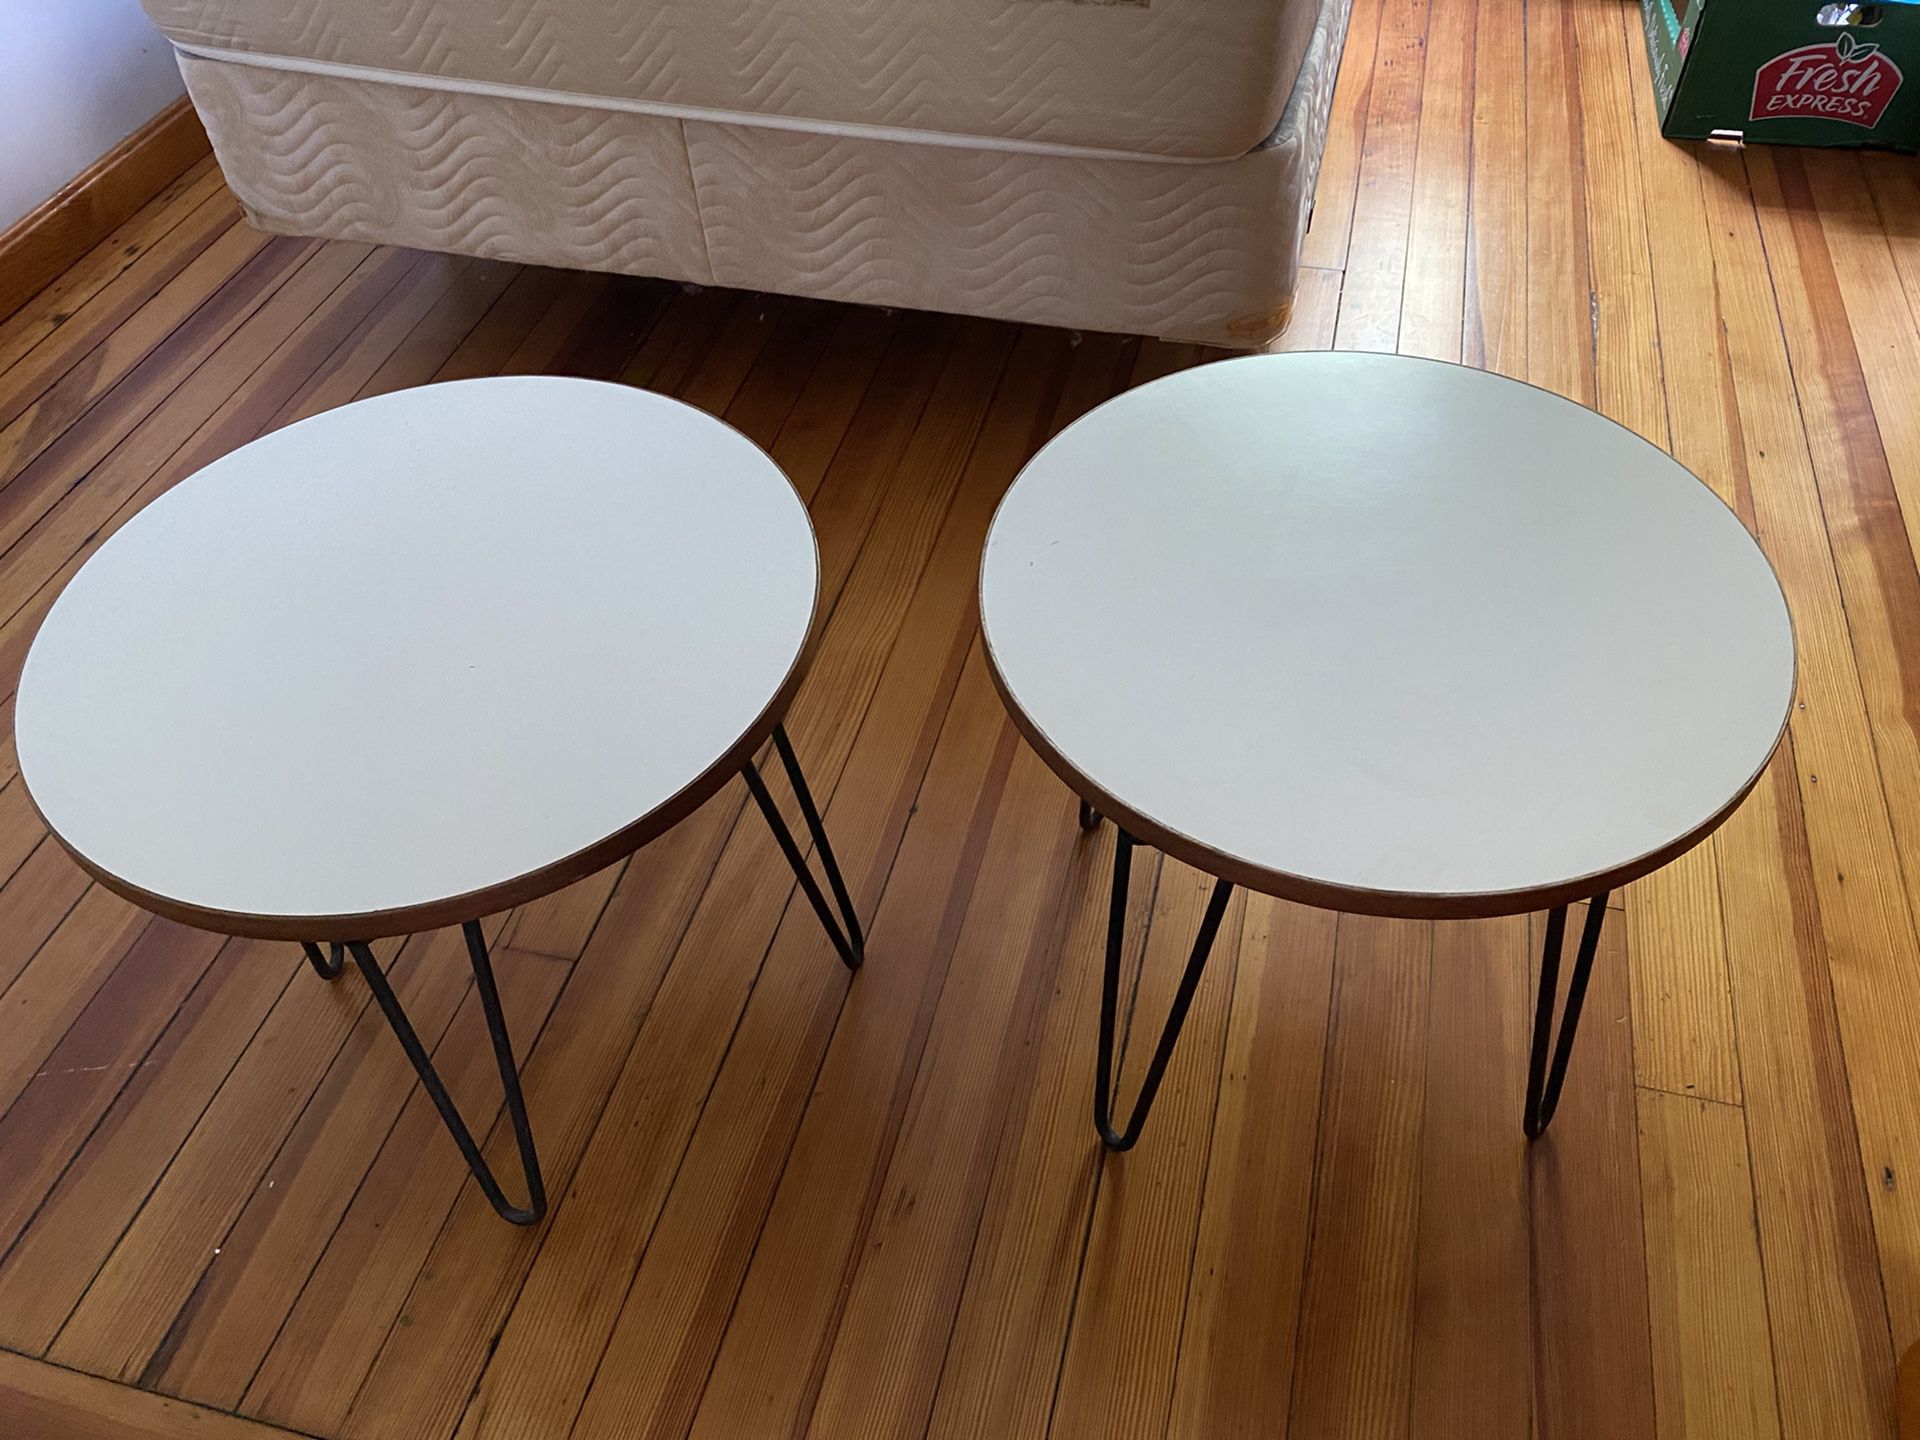 2 small round tables - 20” D x 18” H